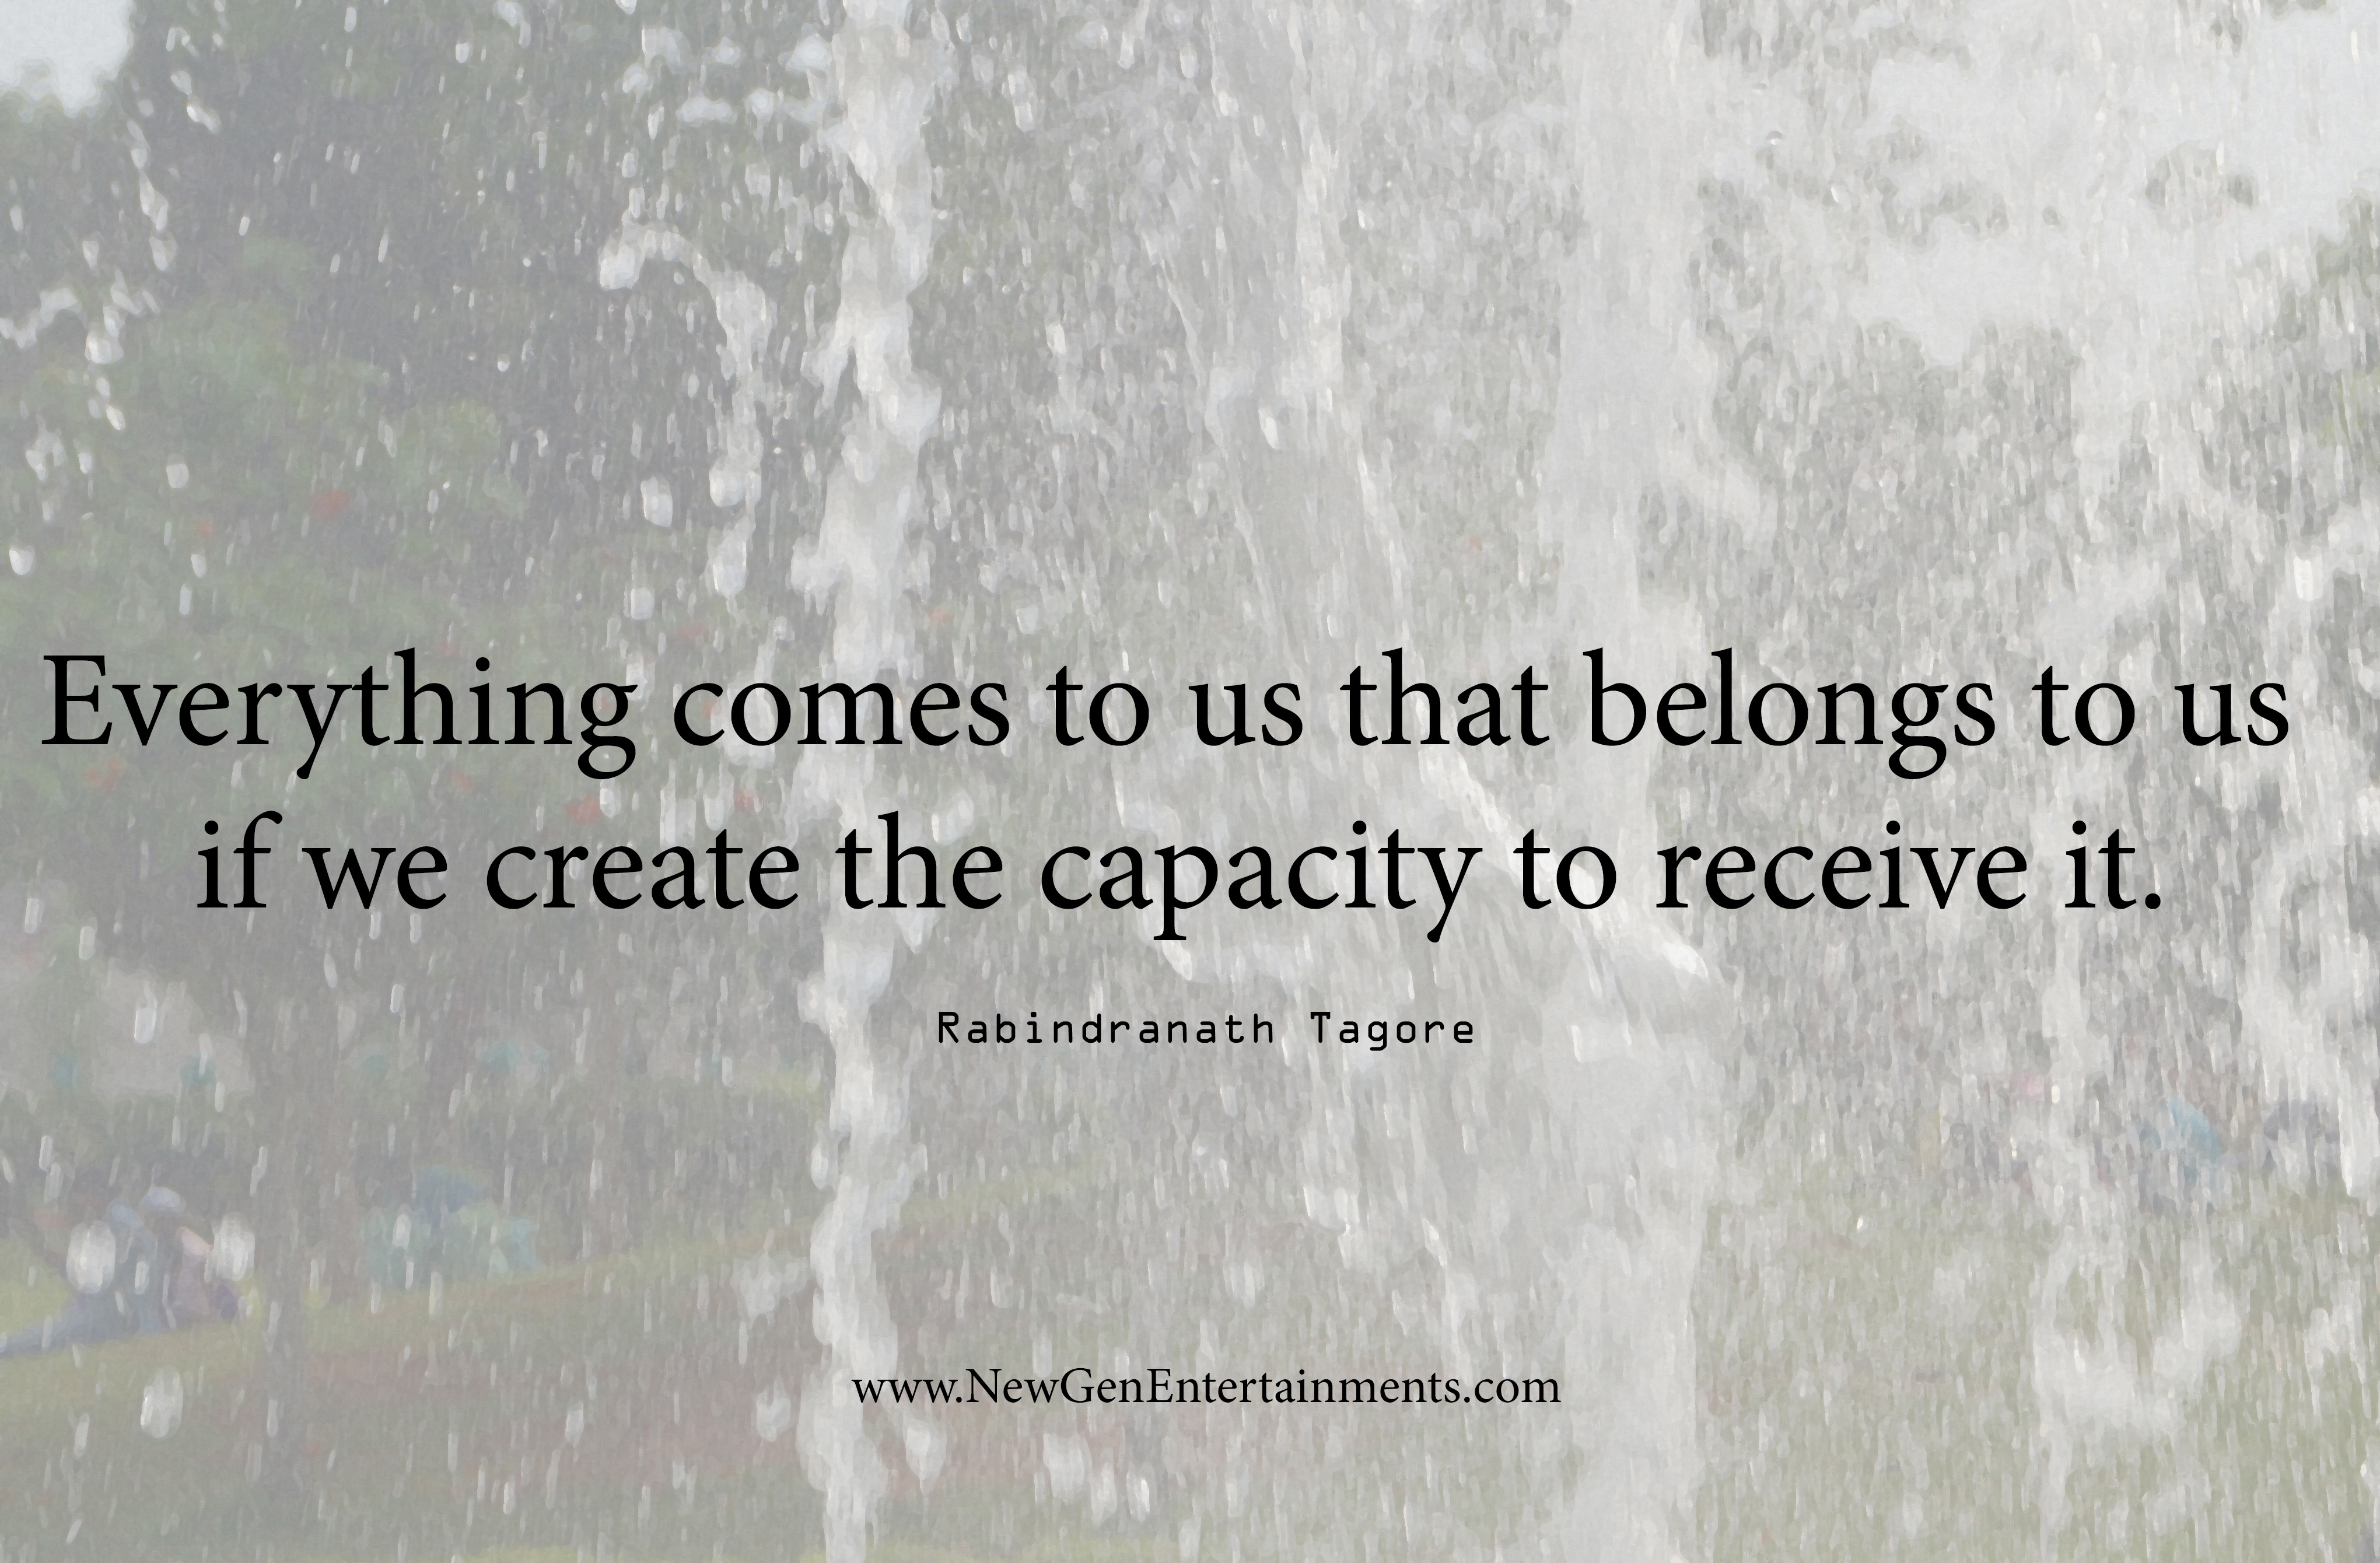 Everything comes to us that belongs to us if we create the capacity to receive it